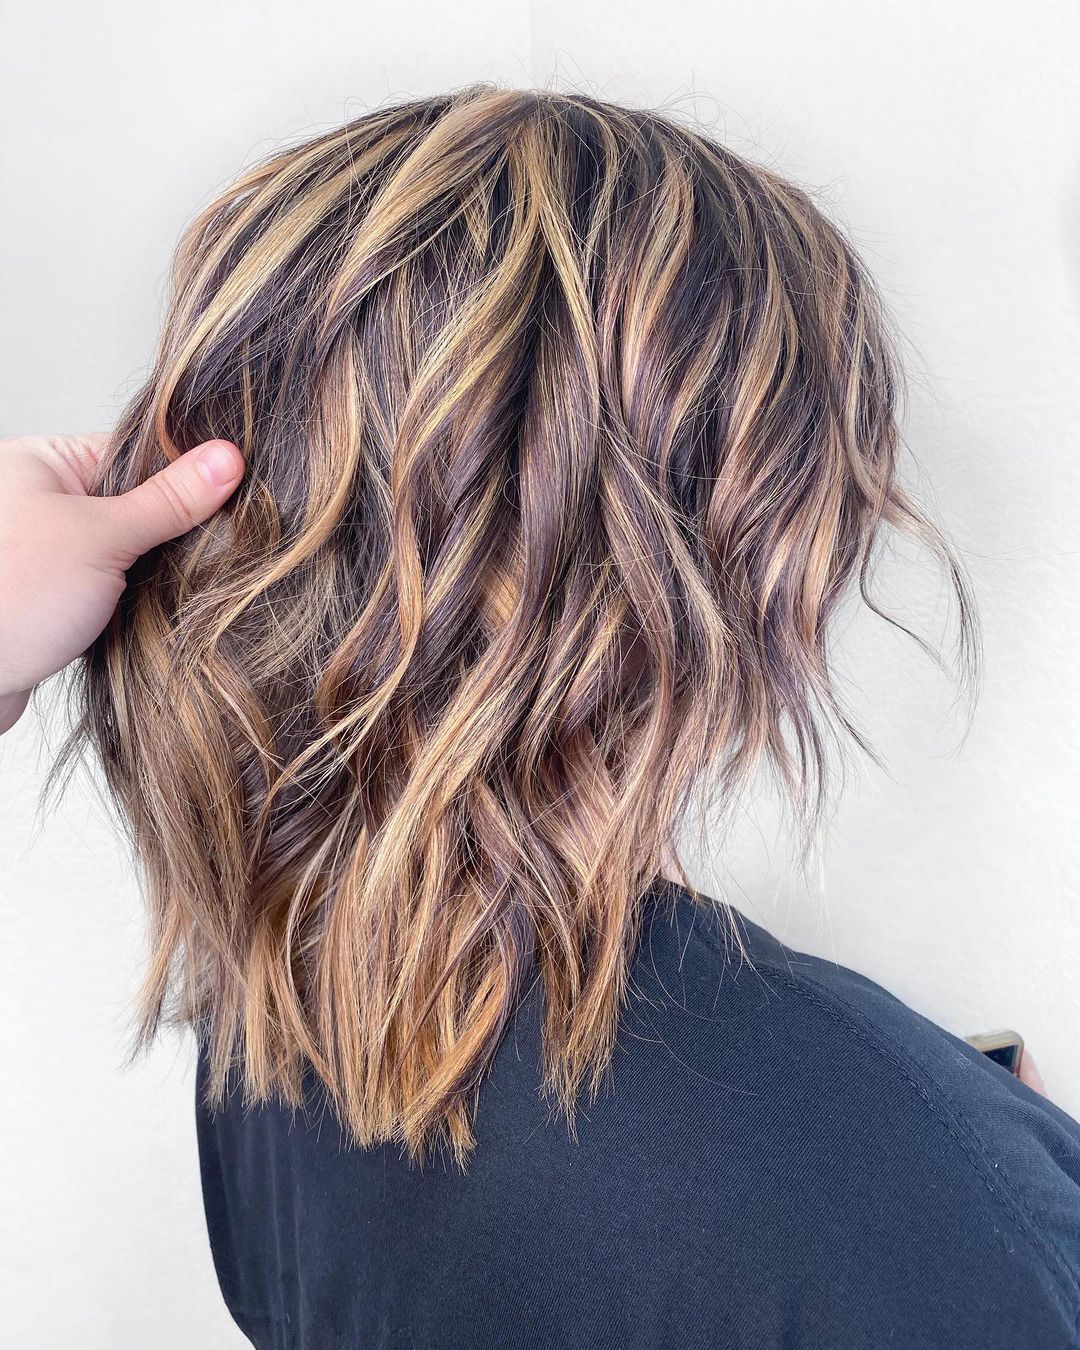 Found: 34These long bronde waves are ideal to brighten up dark hair with blonde  highlights. If you've got a light to medium brown natural base, ask your  colorist for balayage. Or, ask